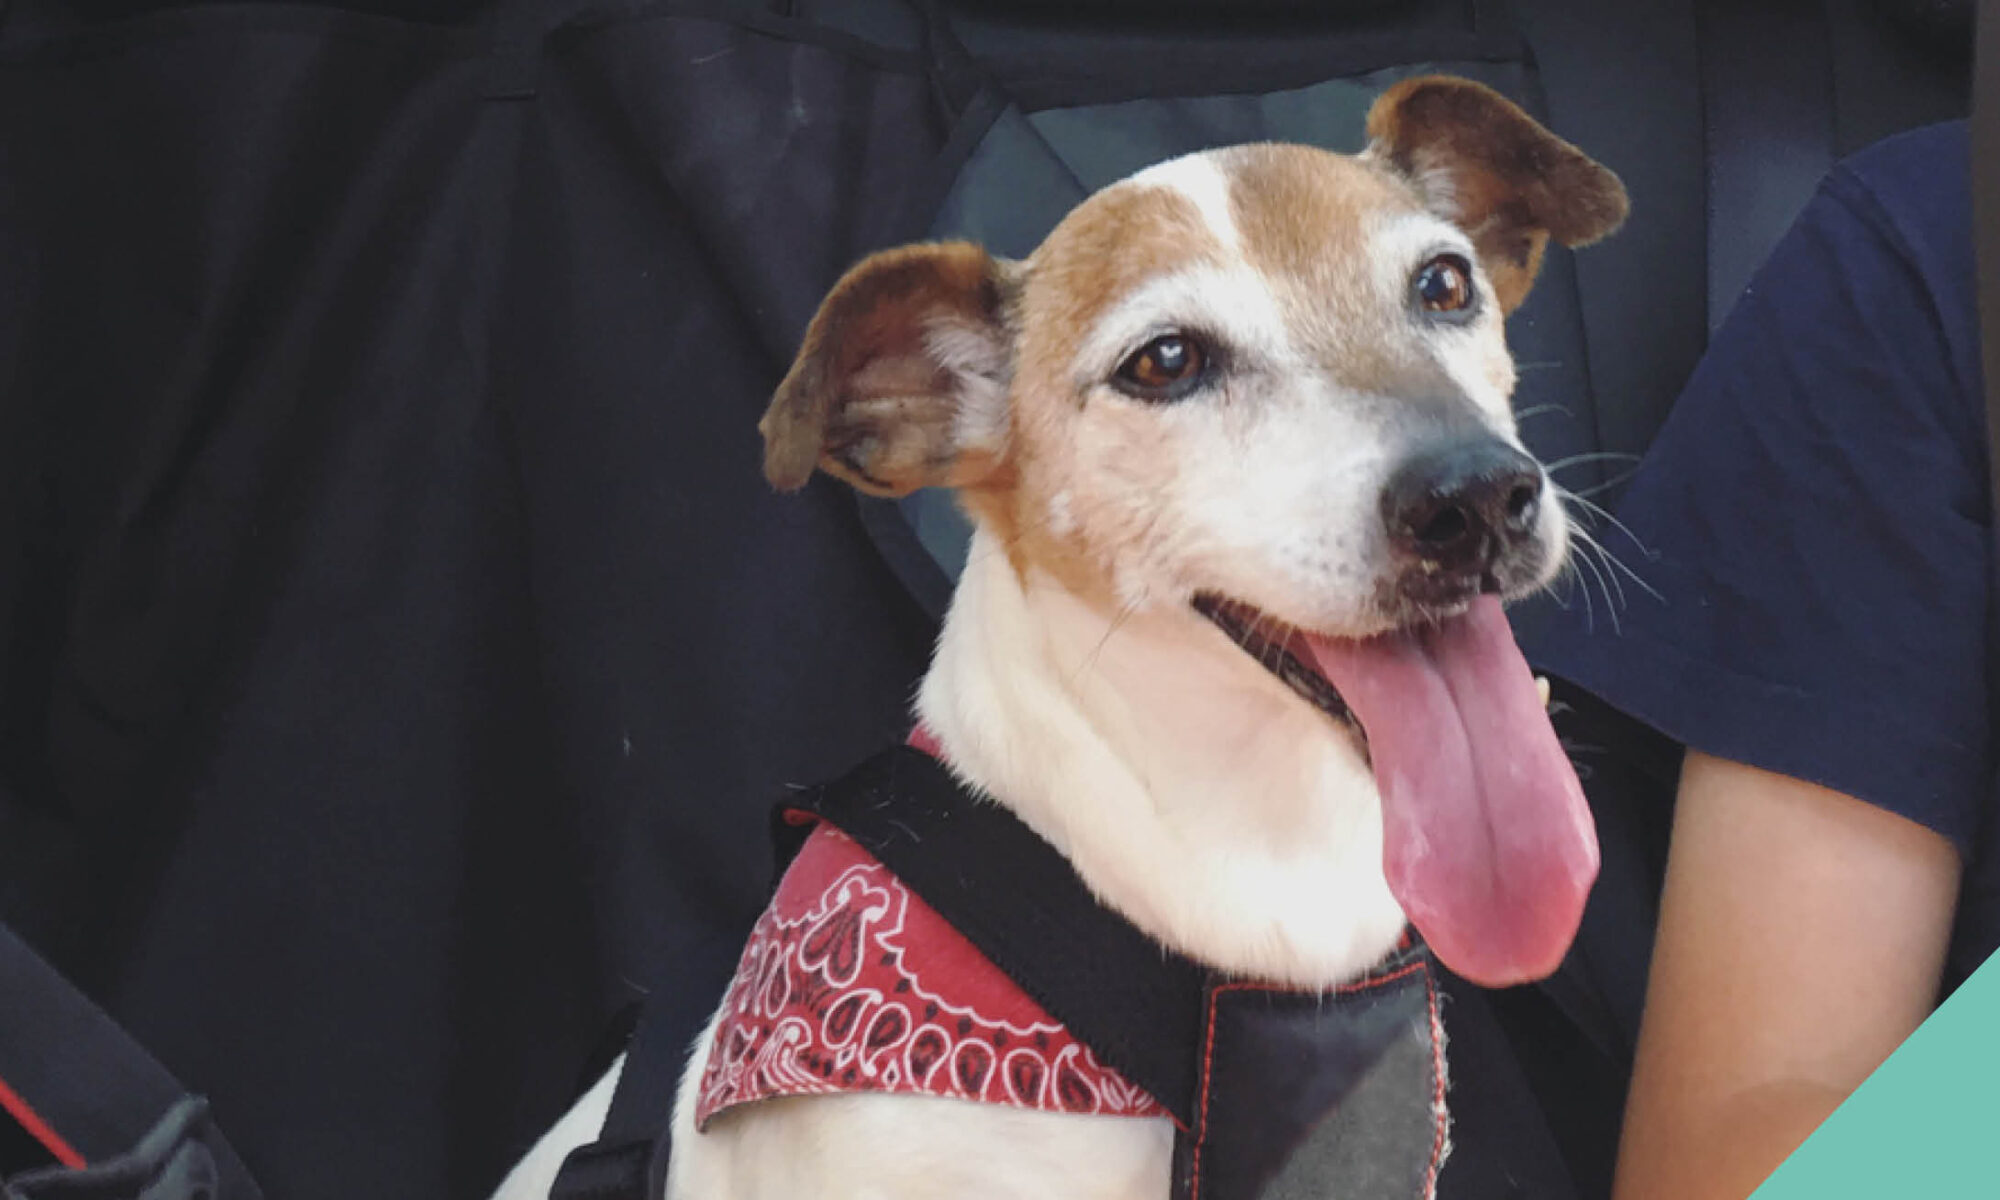 A dog with his tongue out sitting in a car harness